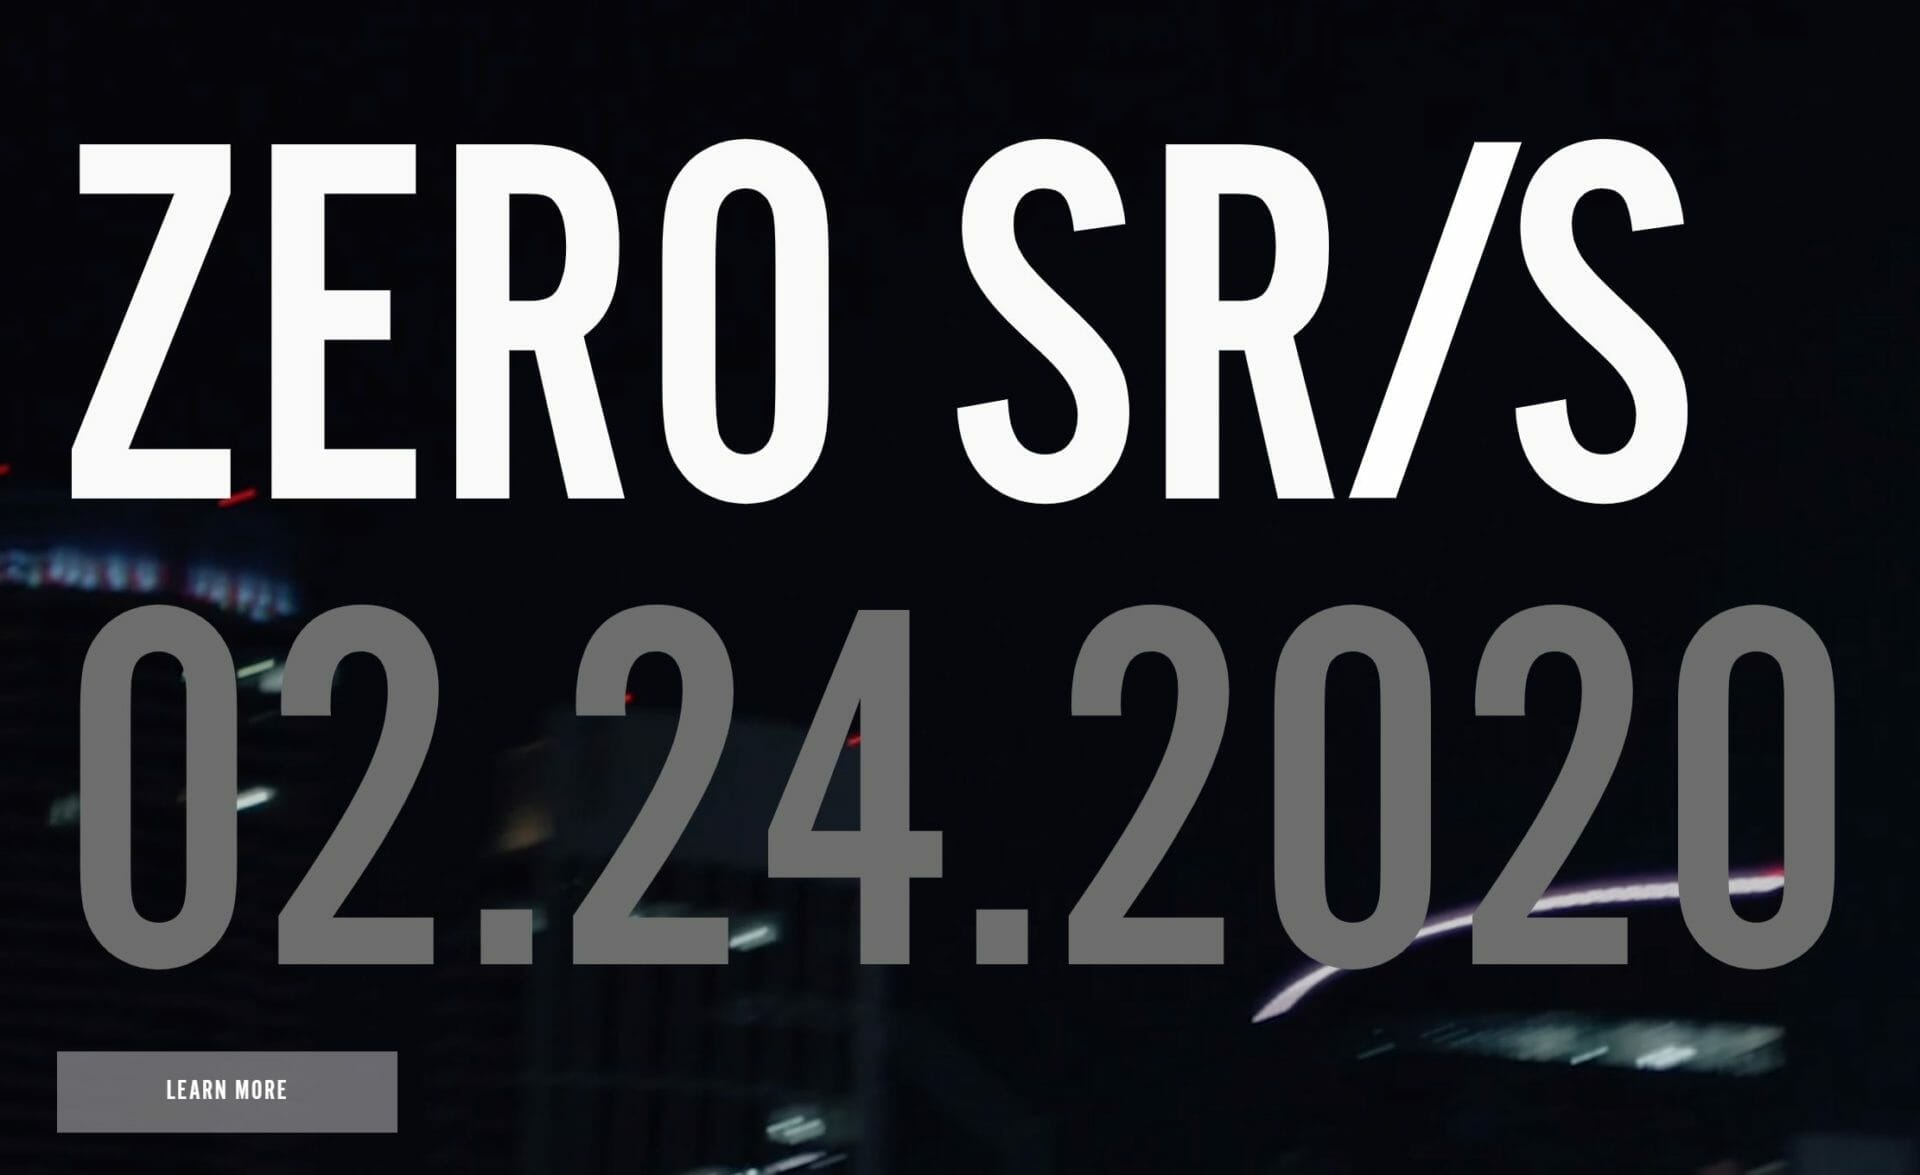 #Zero announces new #SR/S
- also in the APP MOTORCYCLE NEWS